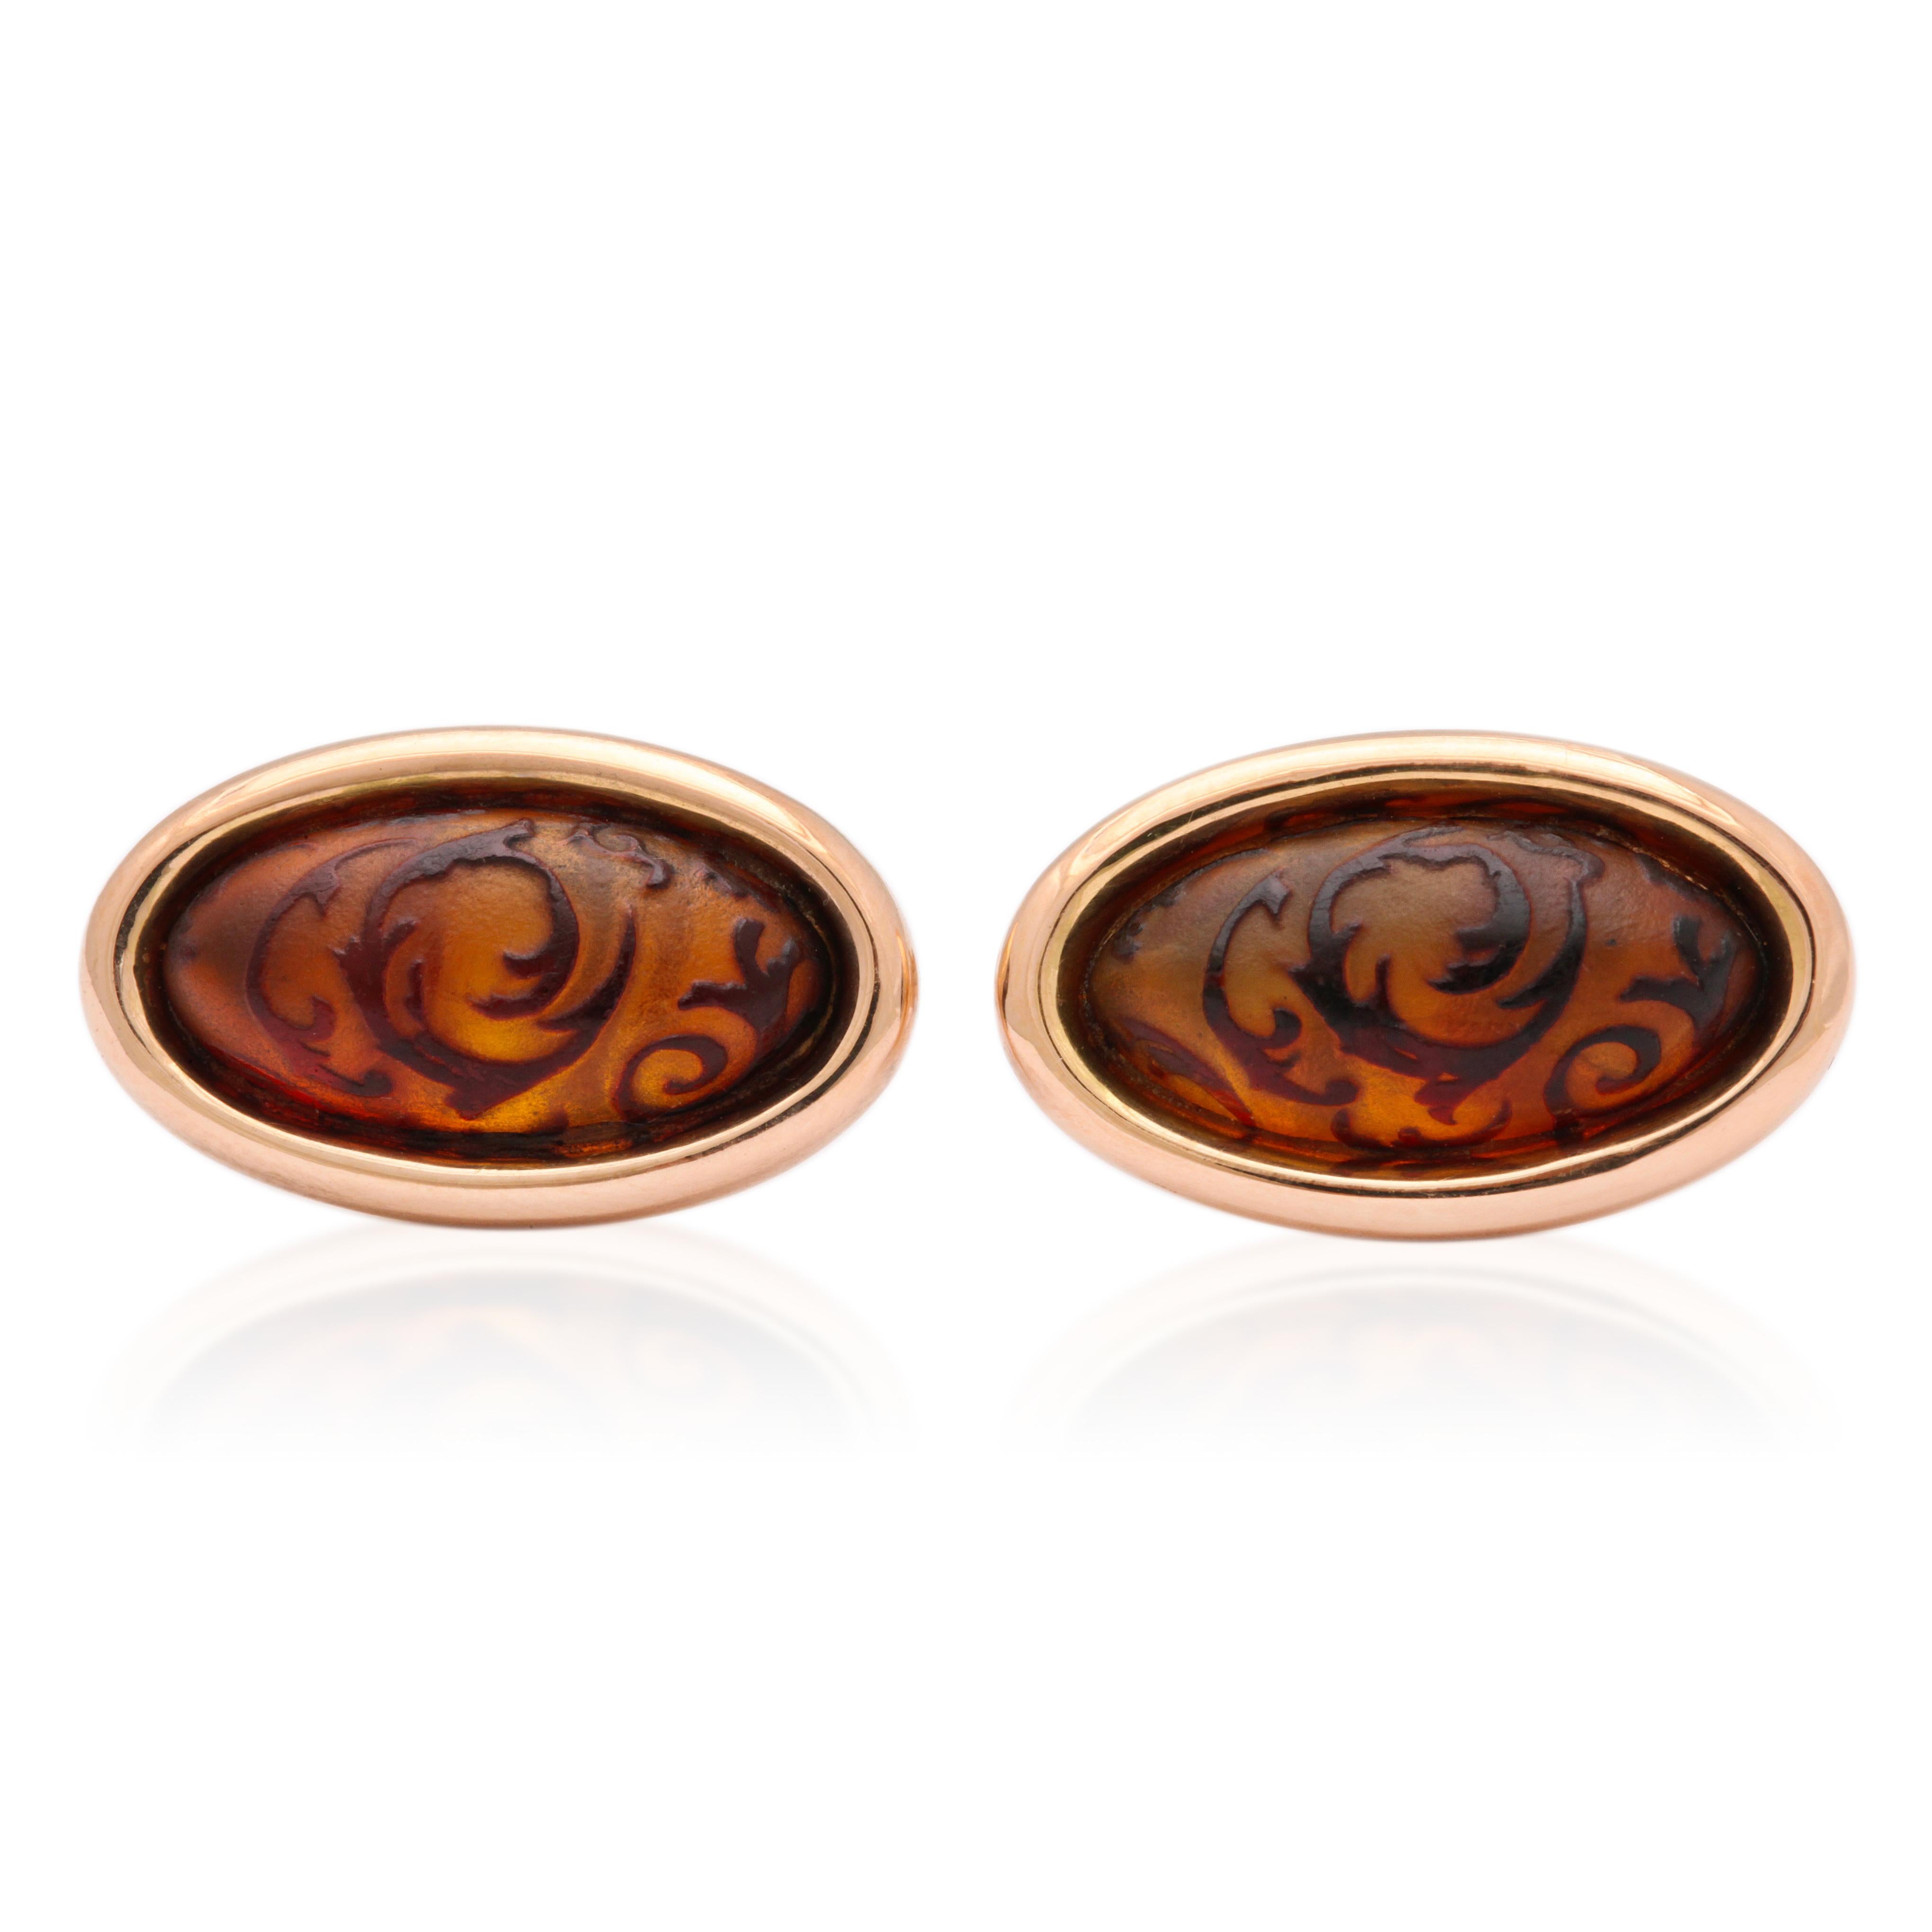 A special technique is utilized to create the design on these amber cabochons and you will never see anything else like them.  The amber is burnt to an opaque black on the surface and is then carved away to transparency, leaving the design in